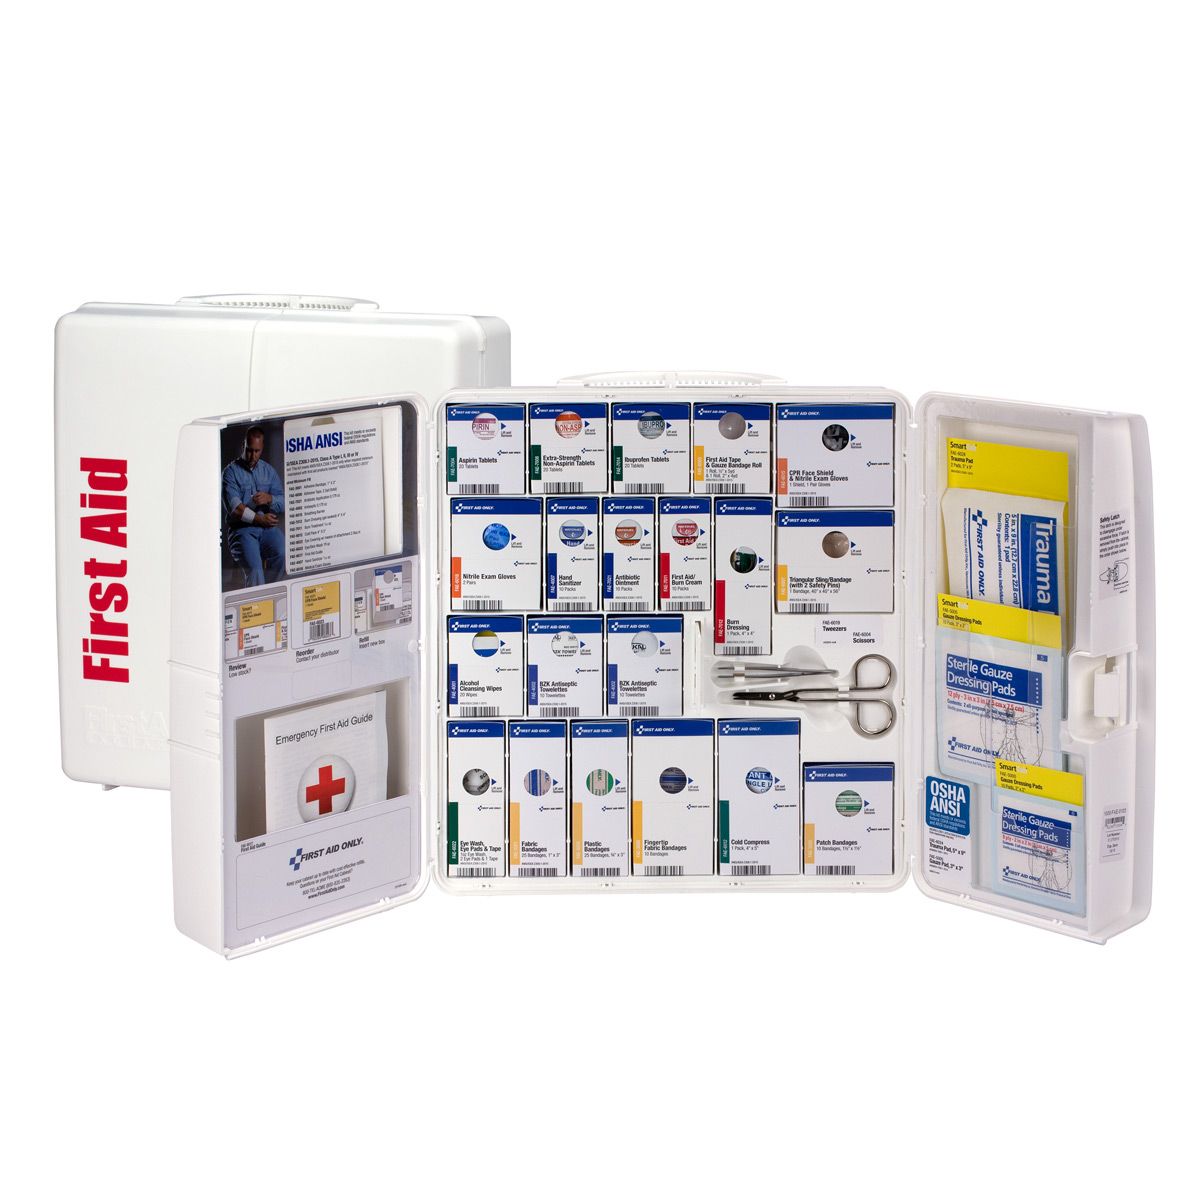 First Aid Kit - Large Plastic Smart Compliance Cabinet - Serves 50 People